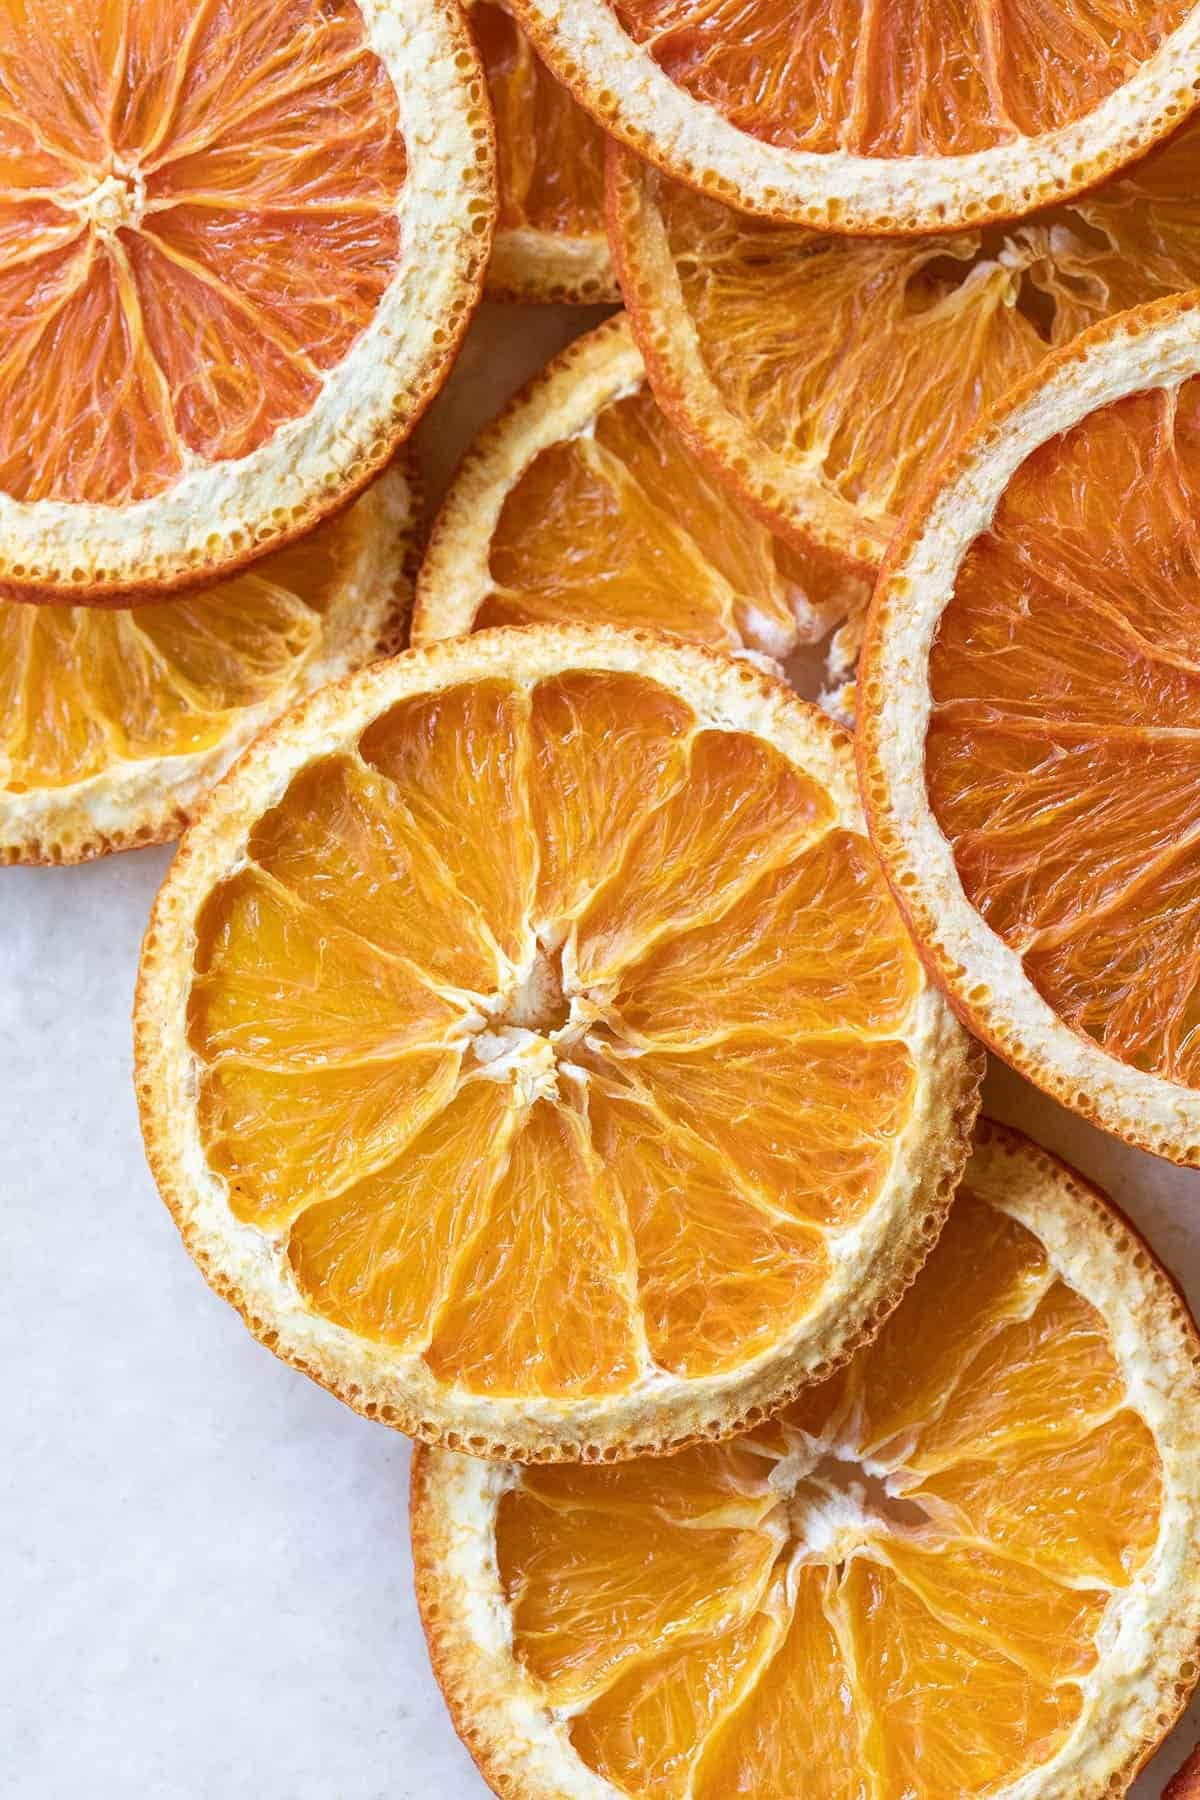 Dried Orange Slices for Food and Decoration